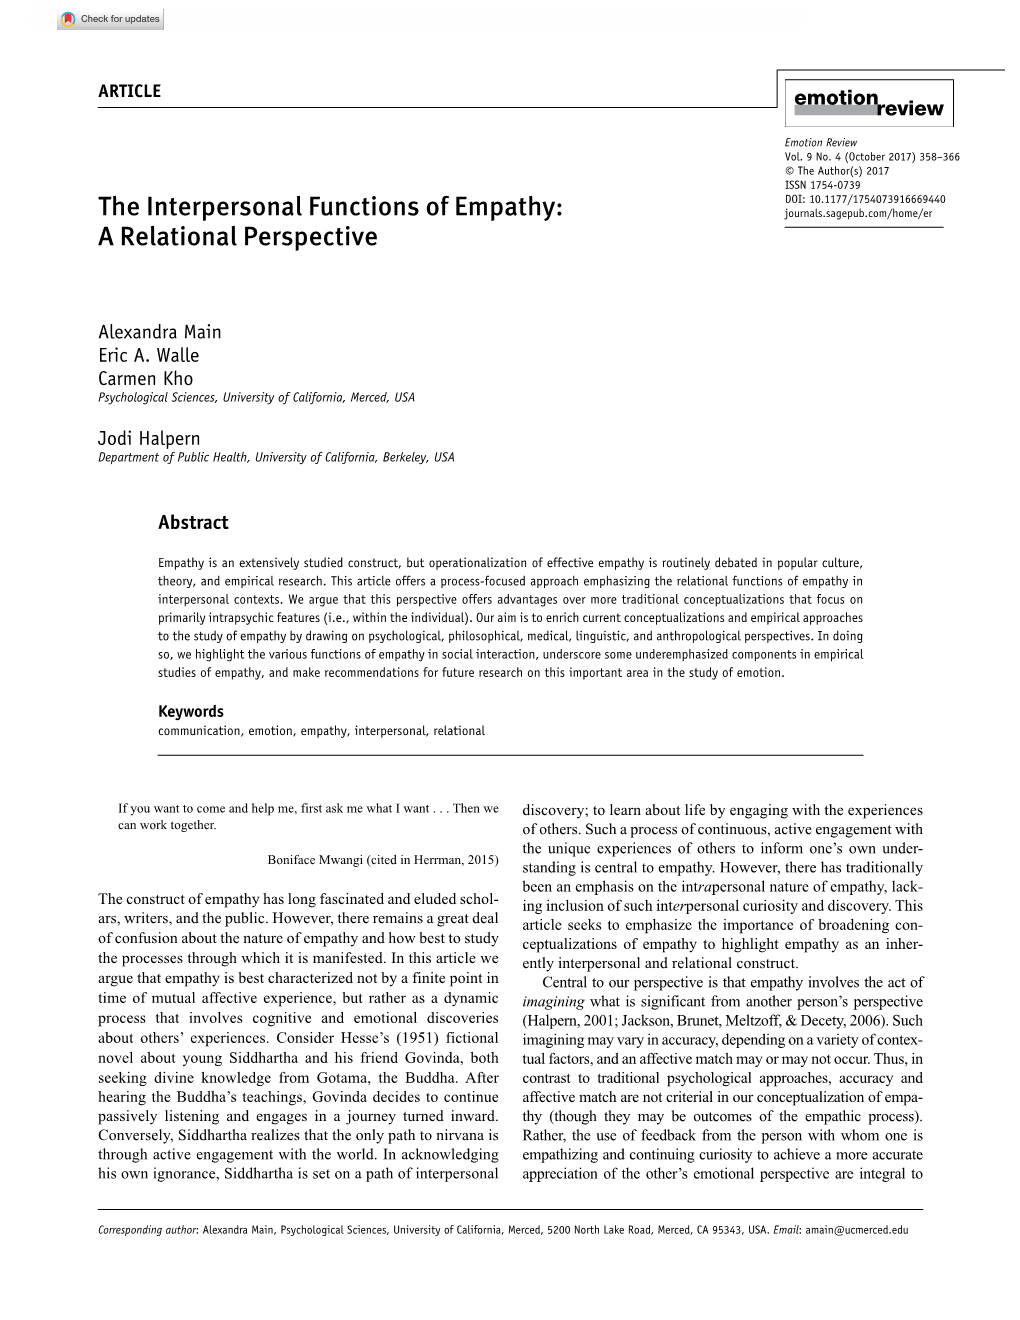 The Interpersonal Functions of Empathy: a Relational Perspective